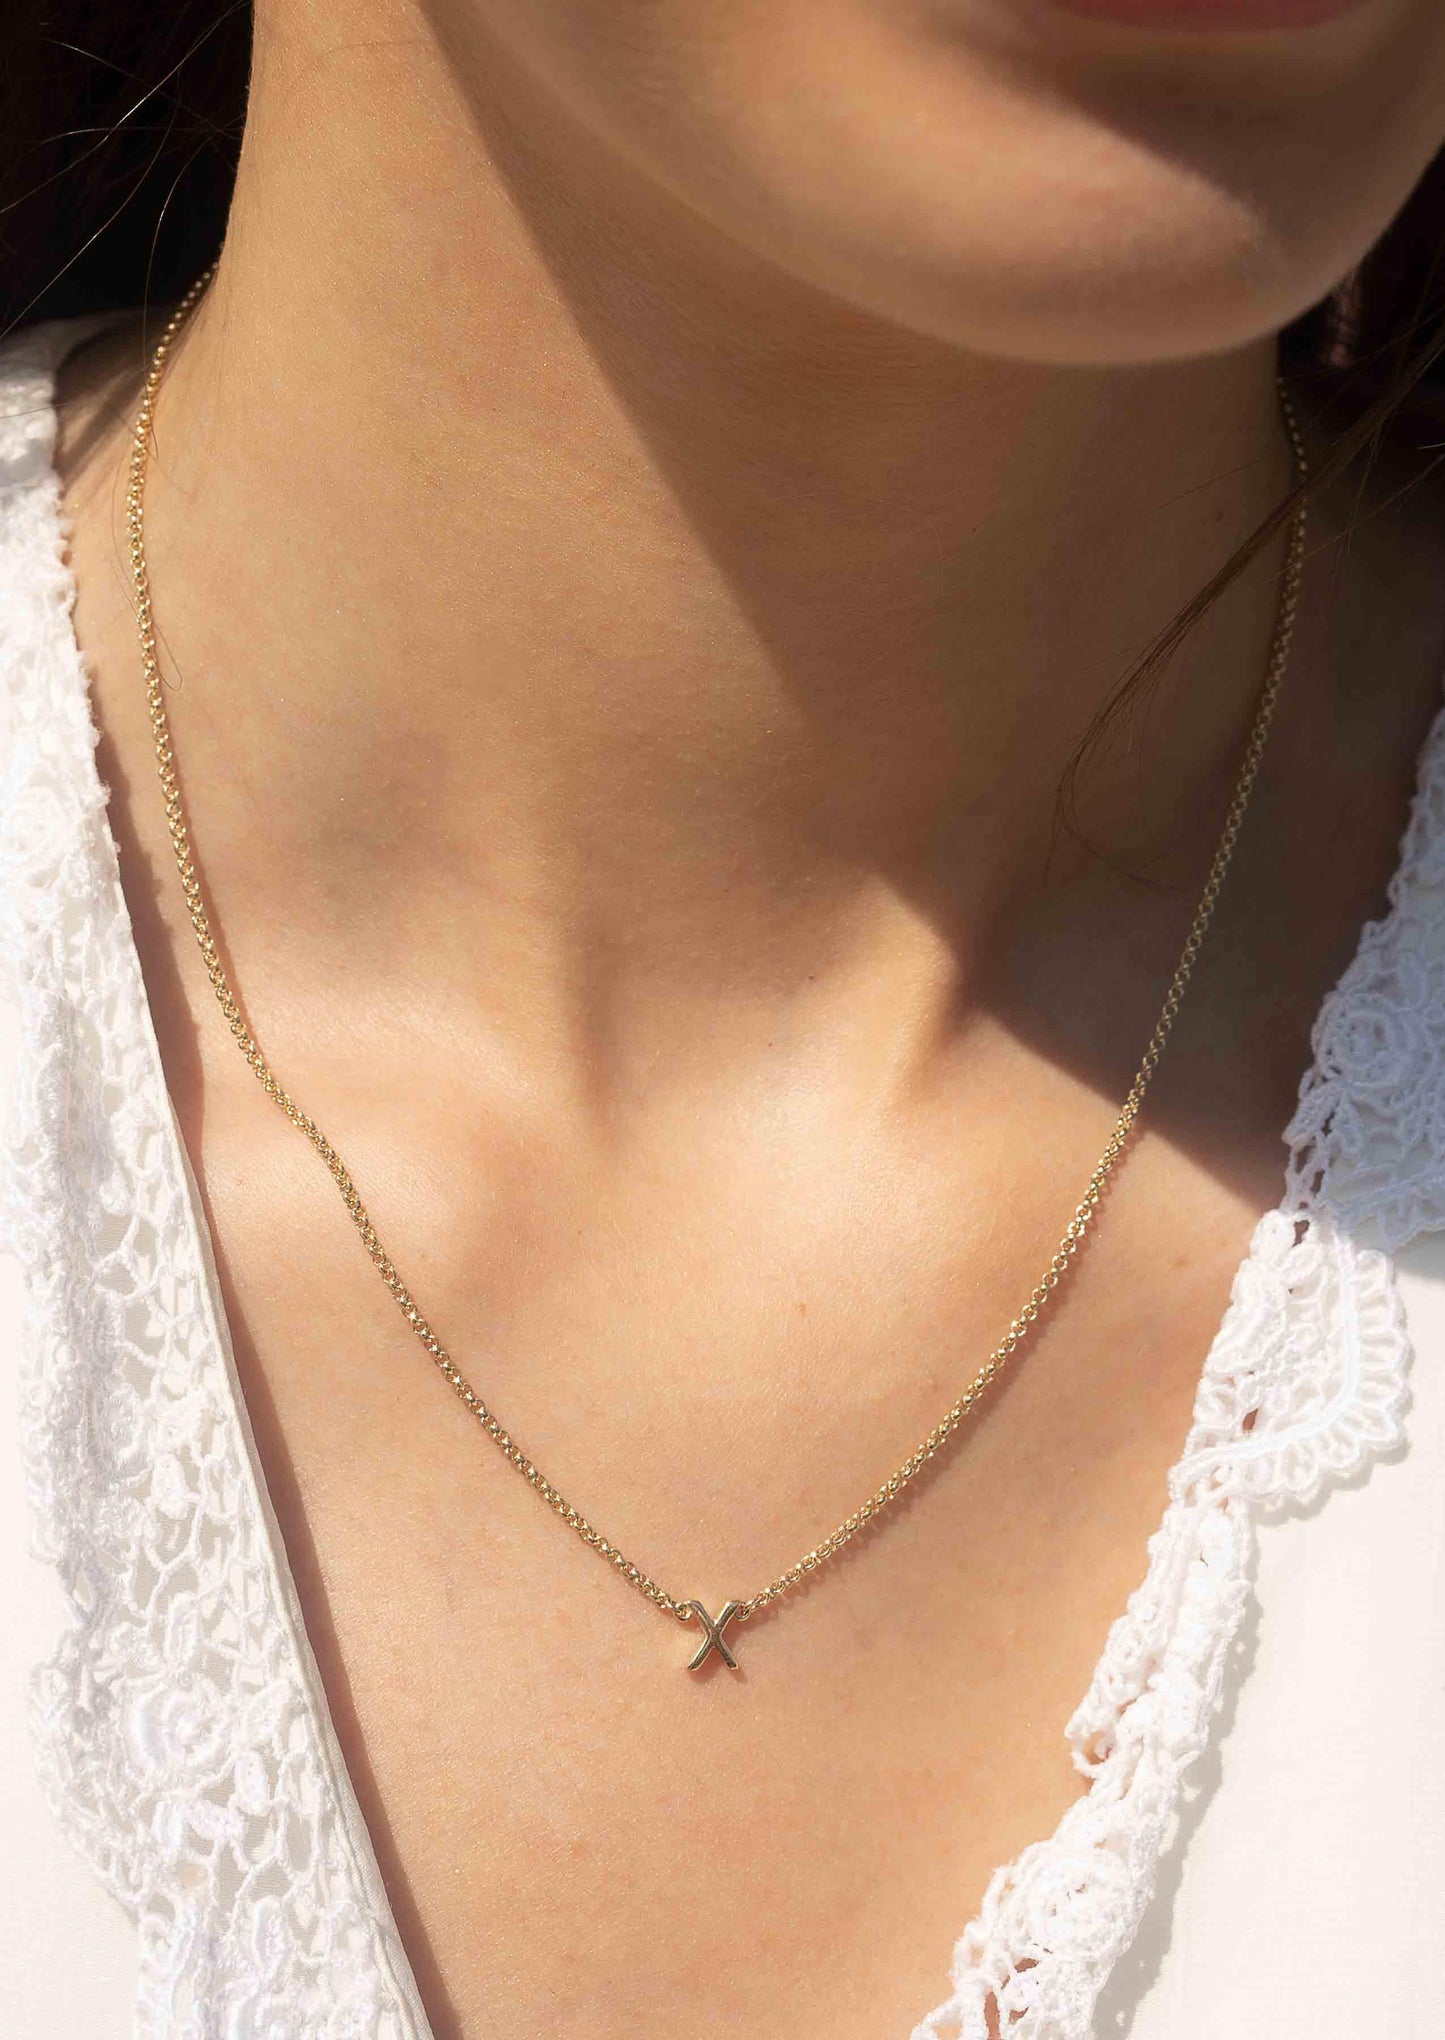 The Solid Gold Metanoia Necklace